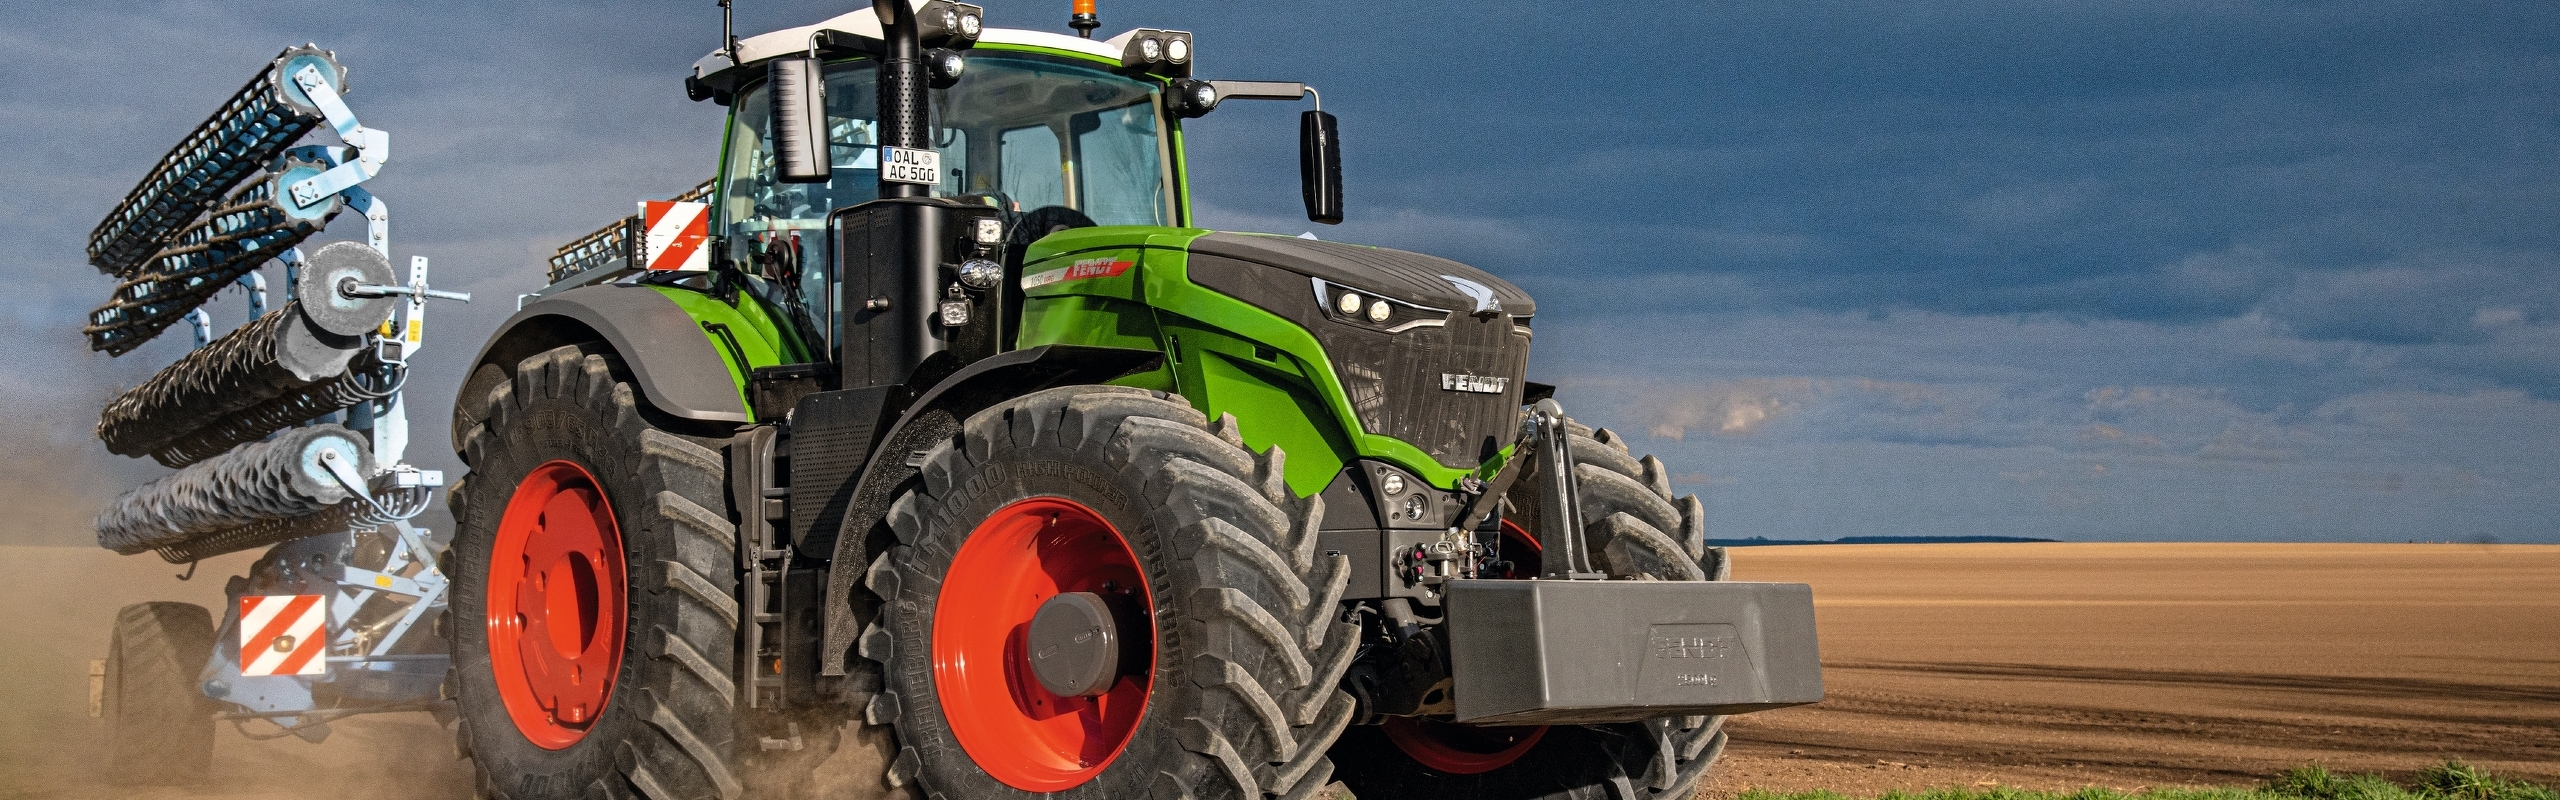 Fendt 1000 Vario with drill combination